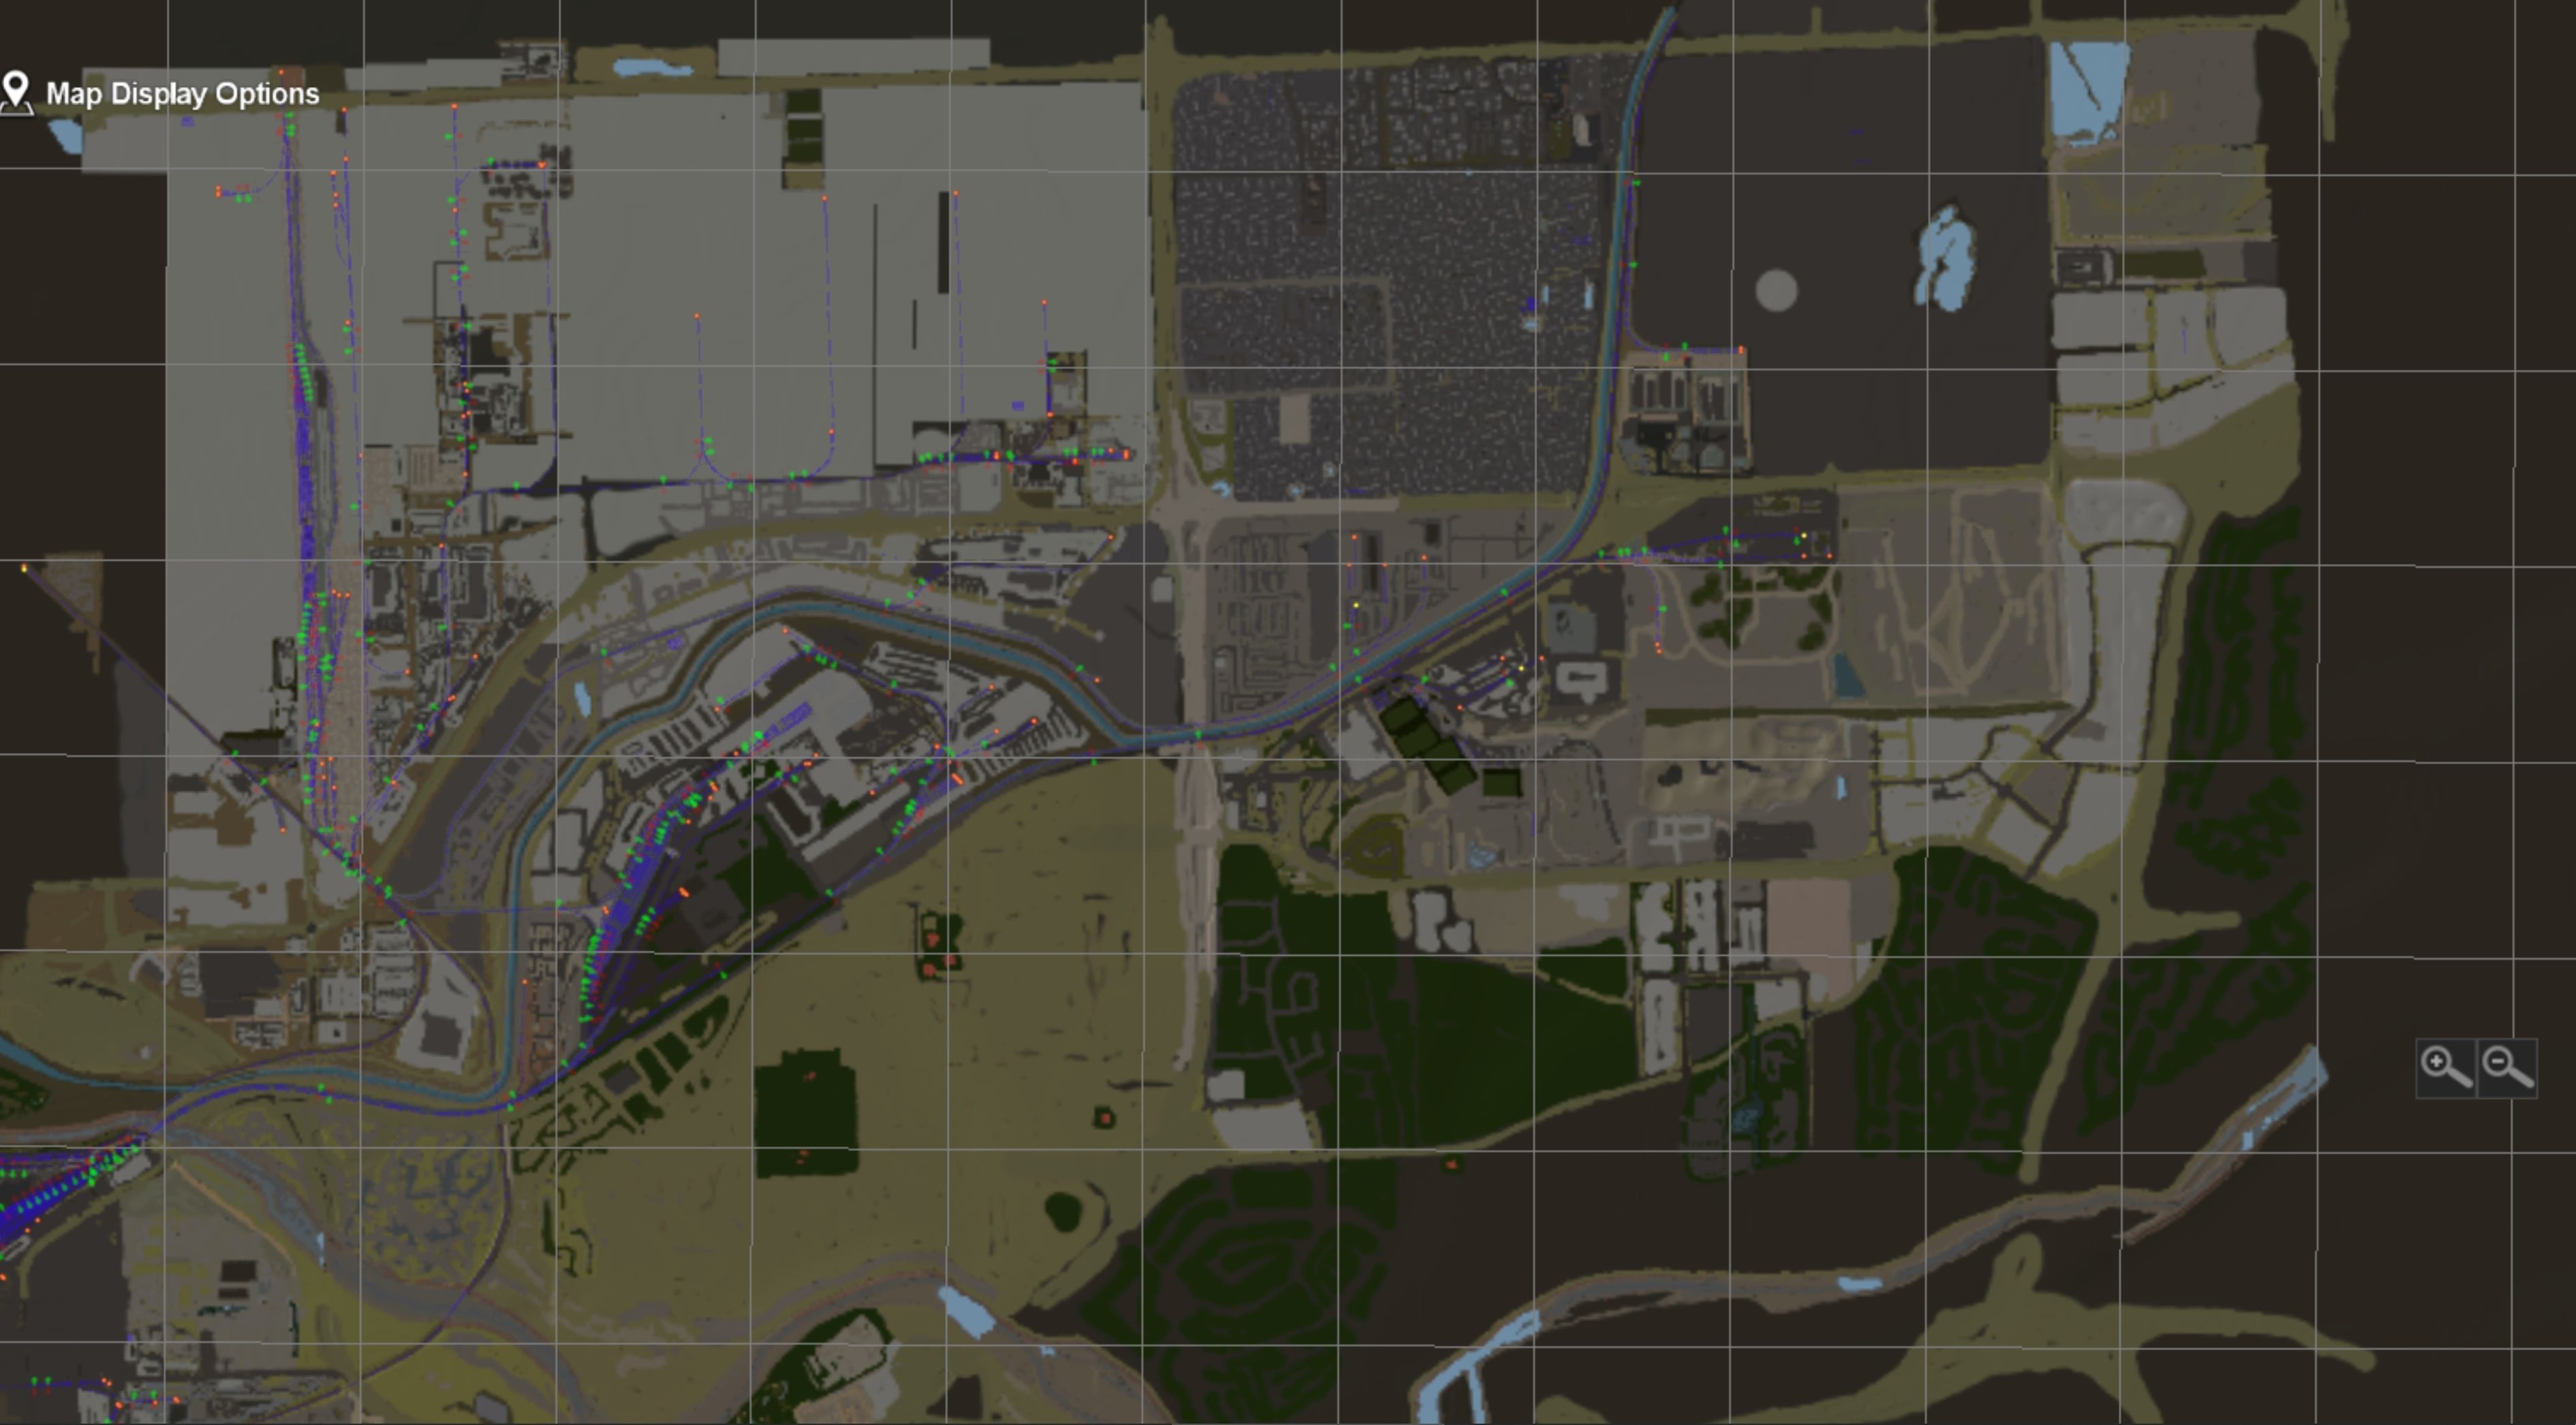 map-view-Foothills-and-CPR-yard.jpg